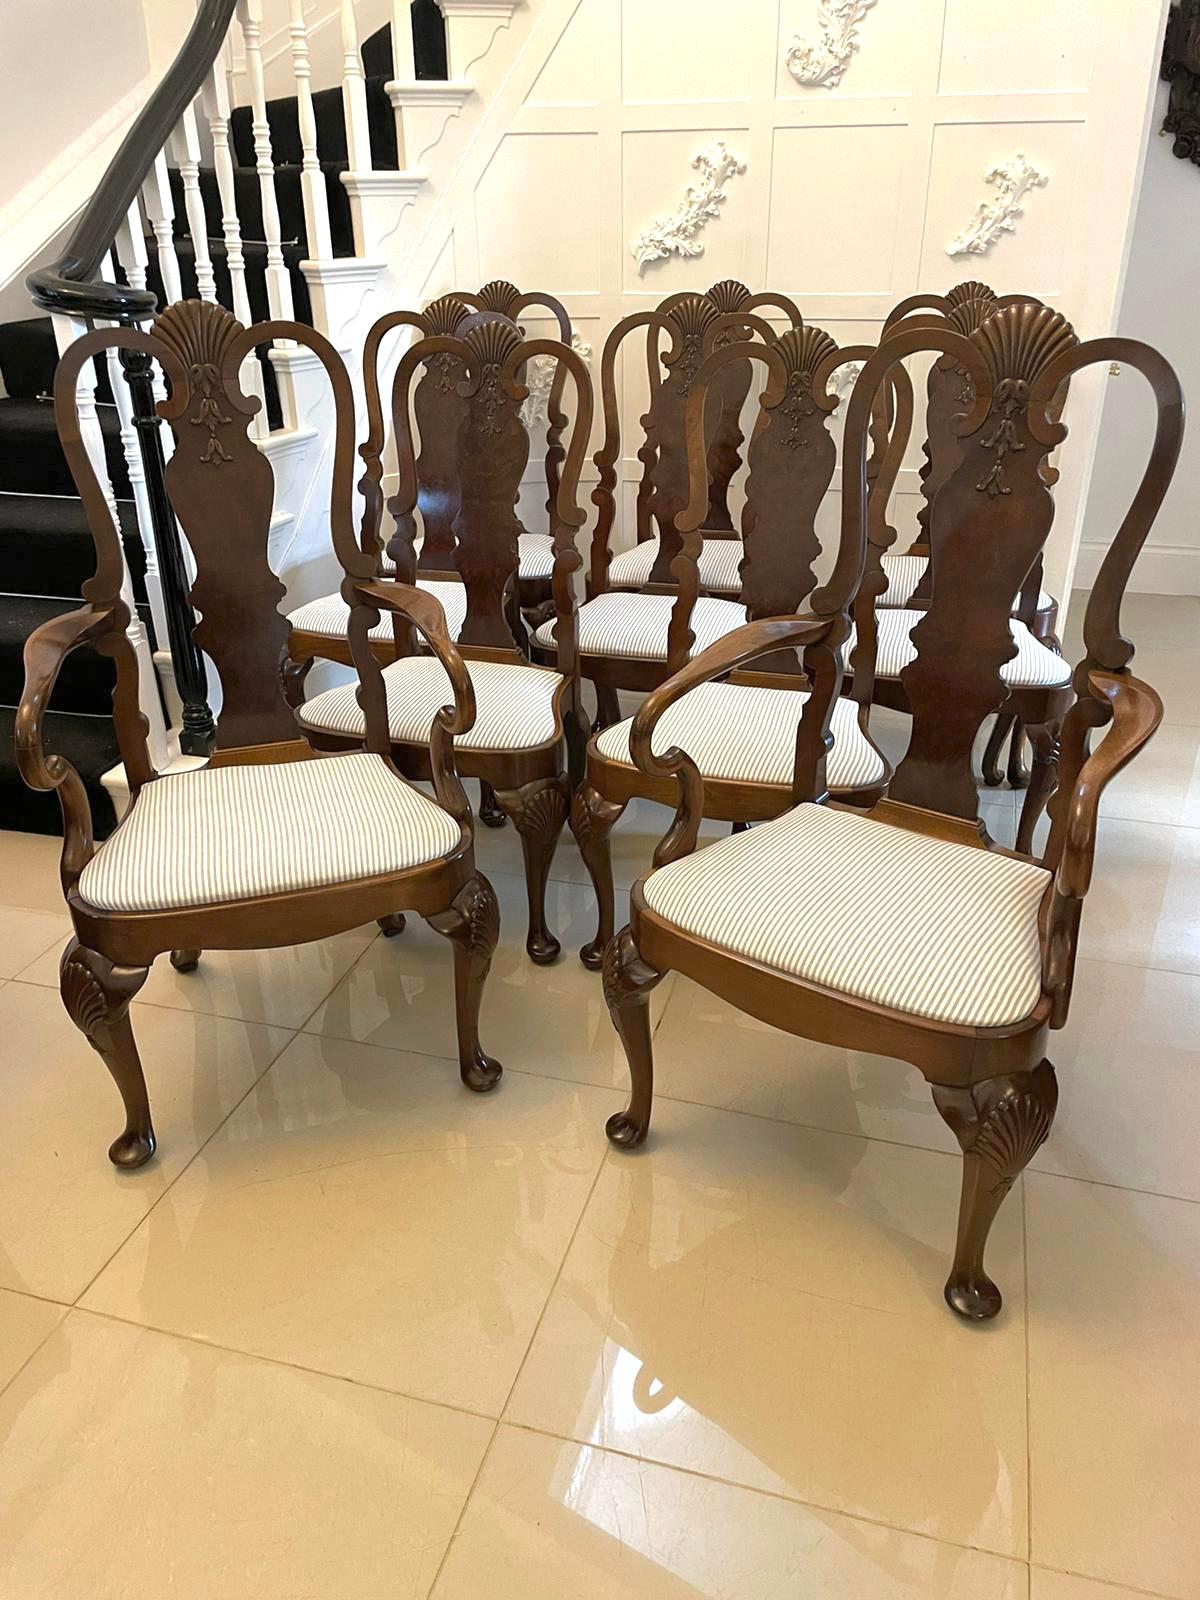 Outstanding quality set of 10 antique Victorian walnut dining chairs consisting of two carver chairs and eight single chairs having outstanding quality shaped carved walnut backs with a burr walnut shaped splat, the carver chairs having shaped open